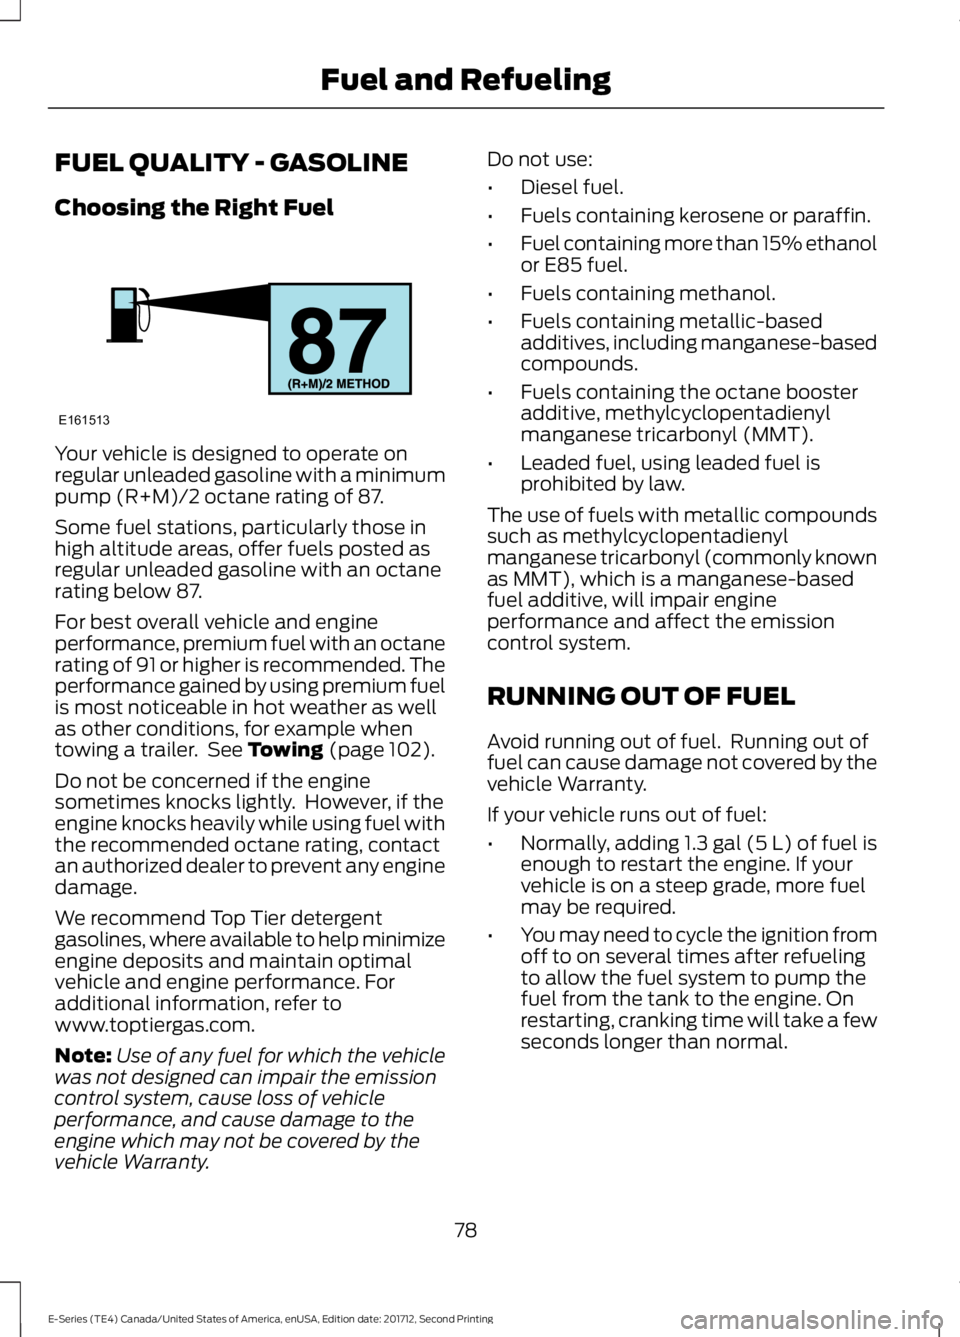 FORD E-350 2018  Owners Manual FUEL QUALITY - GASOLINE
Choosing the Right Fuel
Your vehicle is designed to operate on
regular unleaded gasoline with a minimum
pump (R+M)/2 octane rating of 87.
Some fuel stations, particularly those